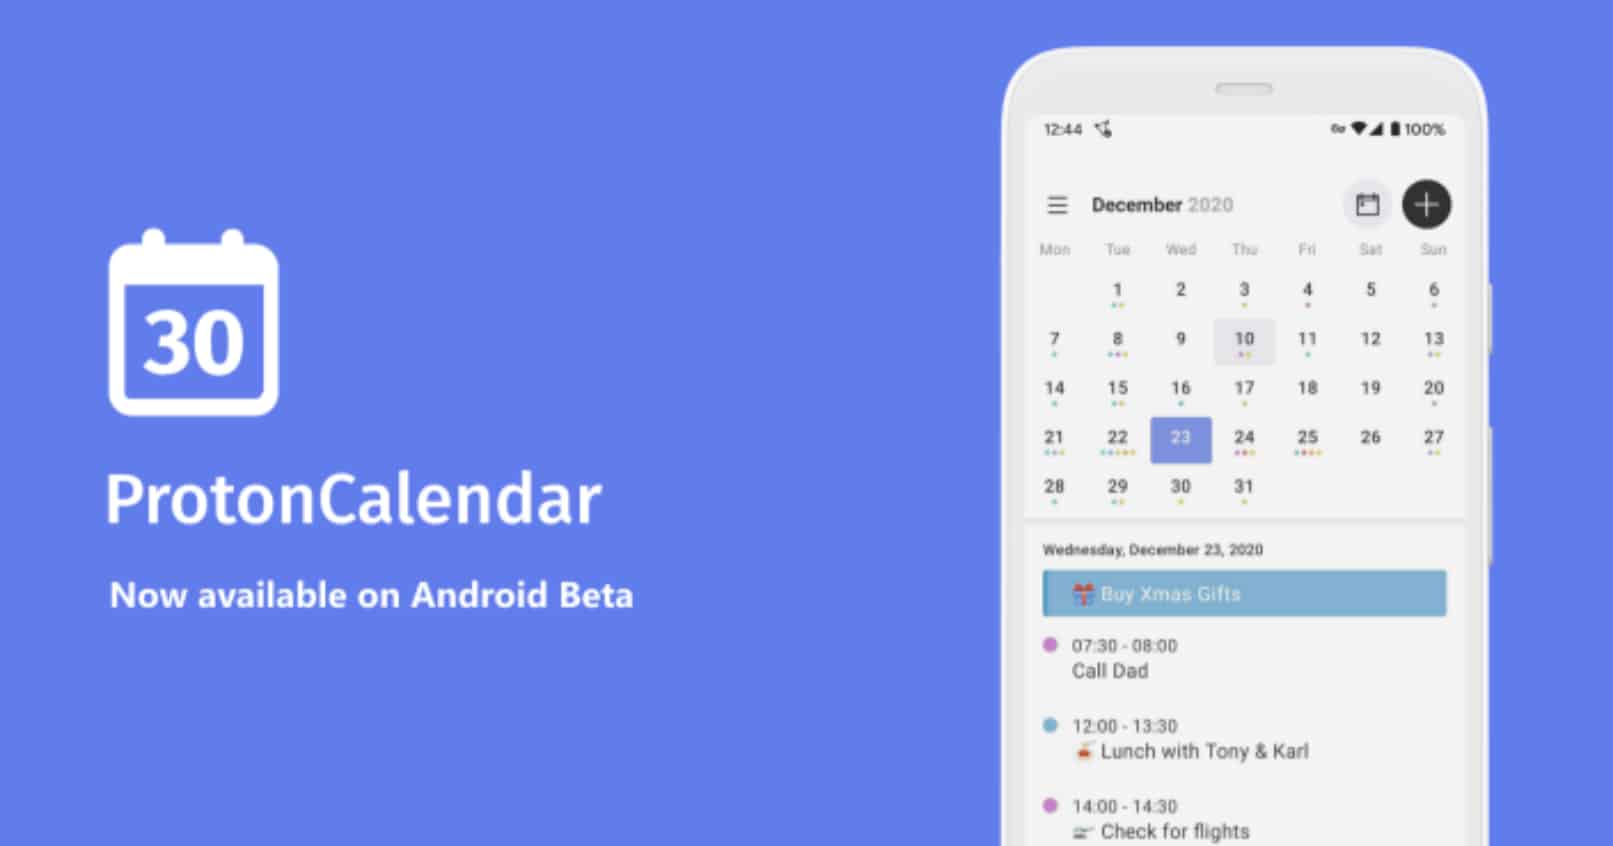 ProtonCalendar is Now Available as An Android App on Google Play Store